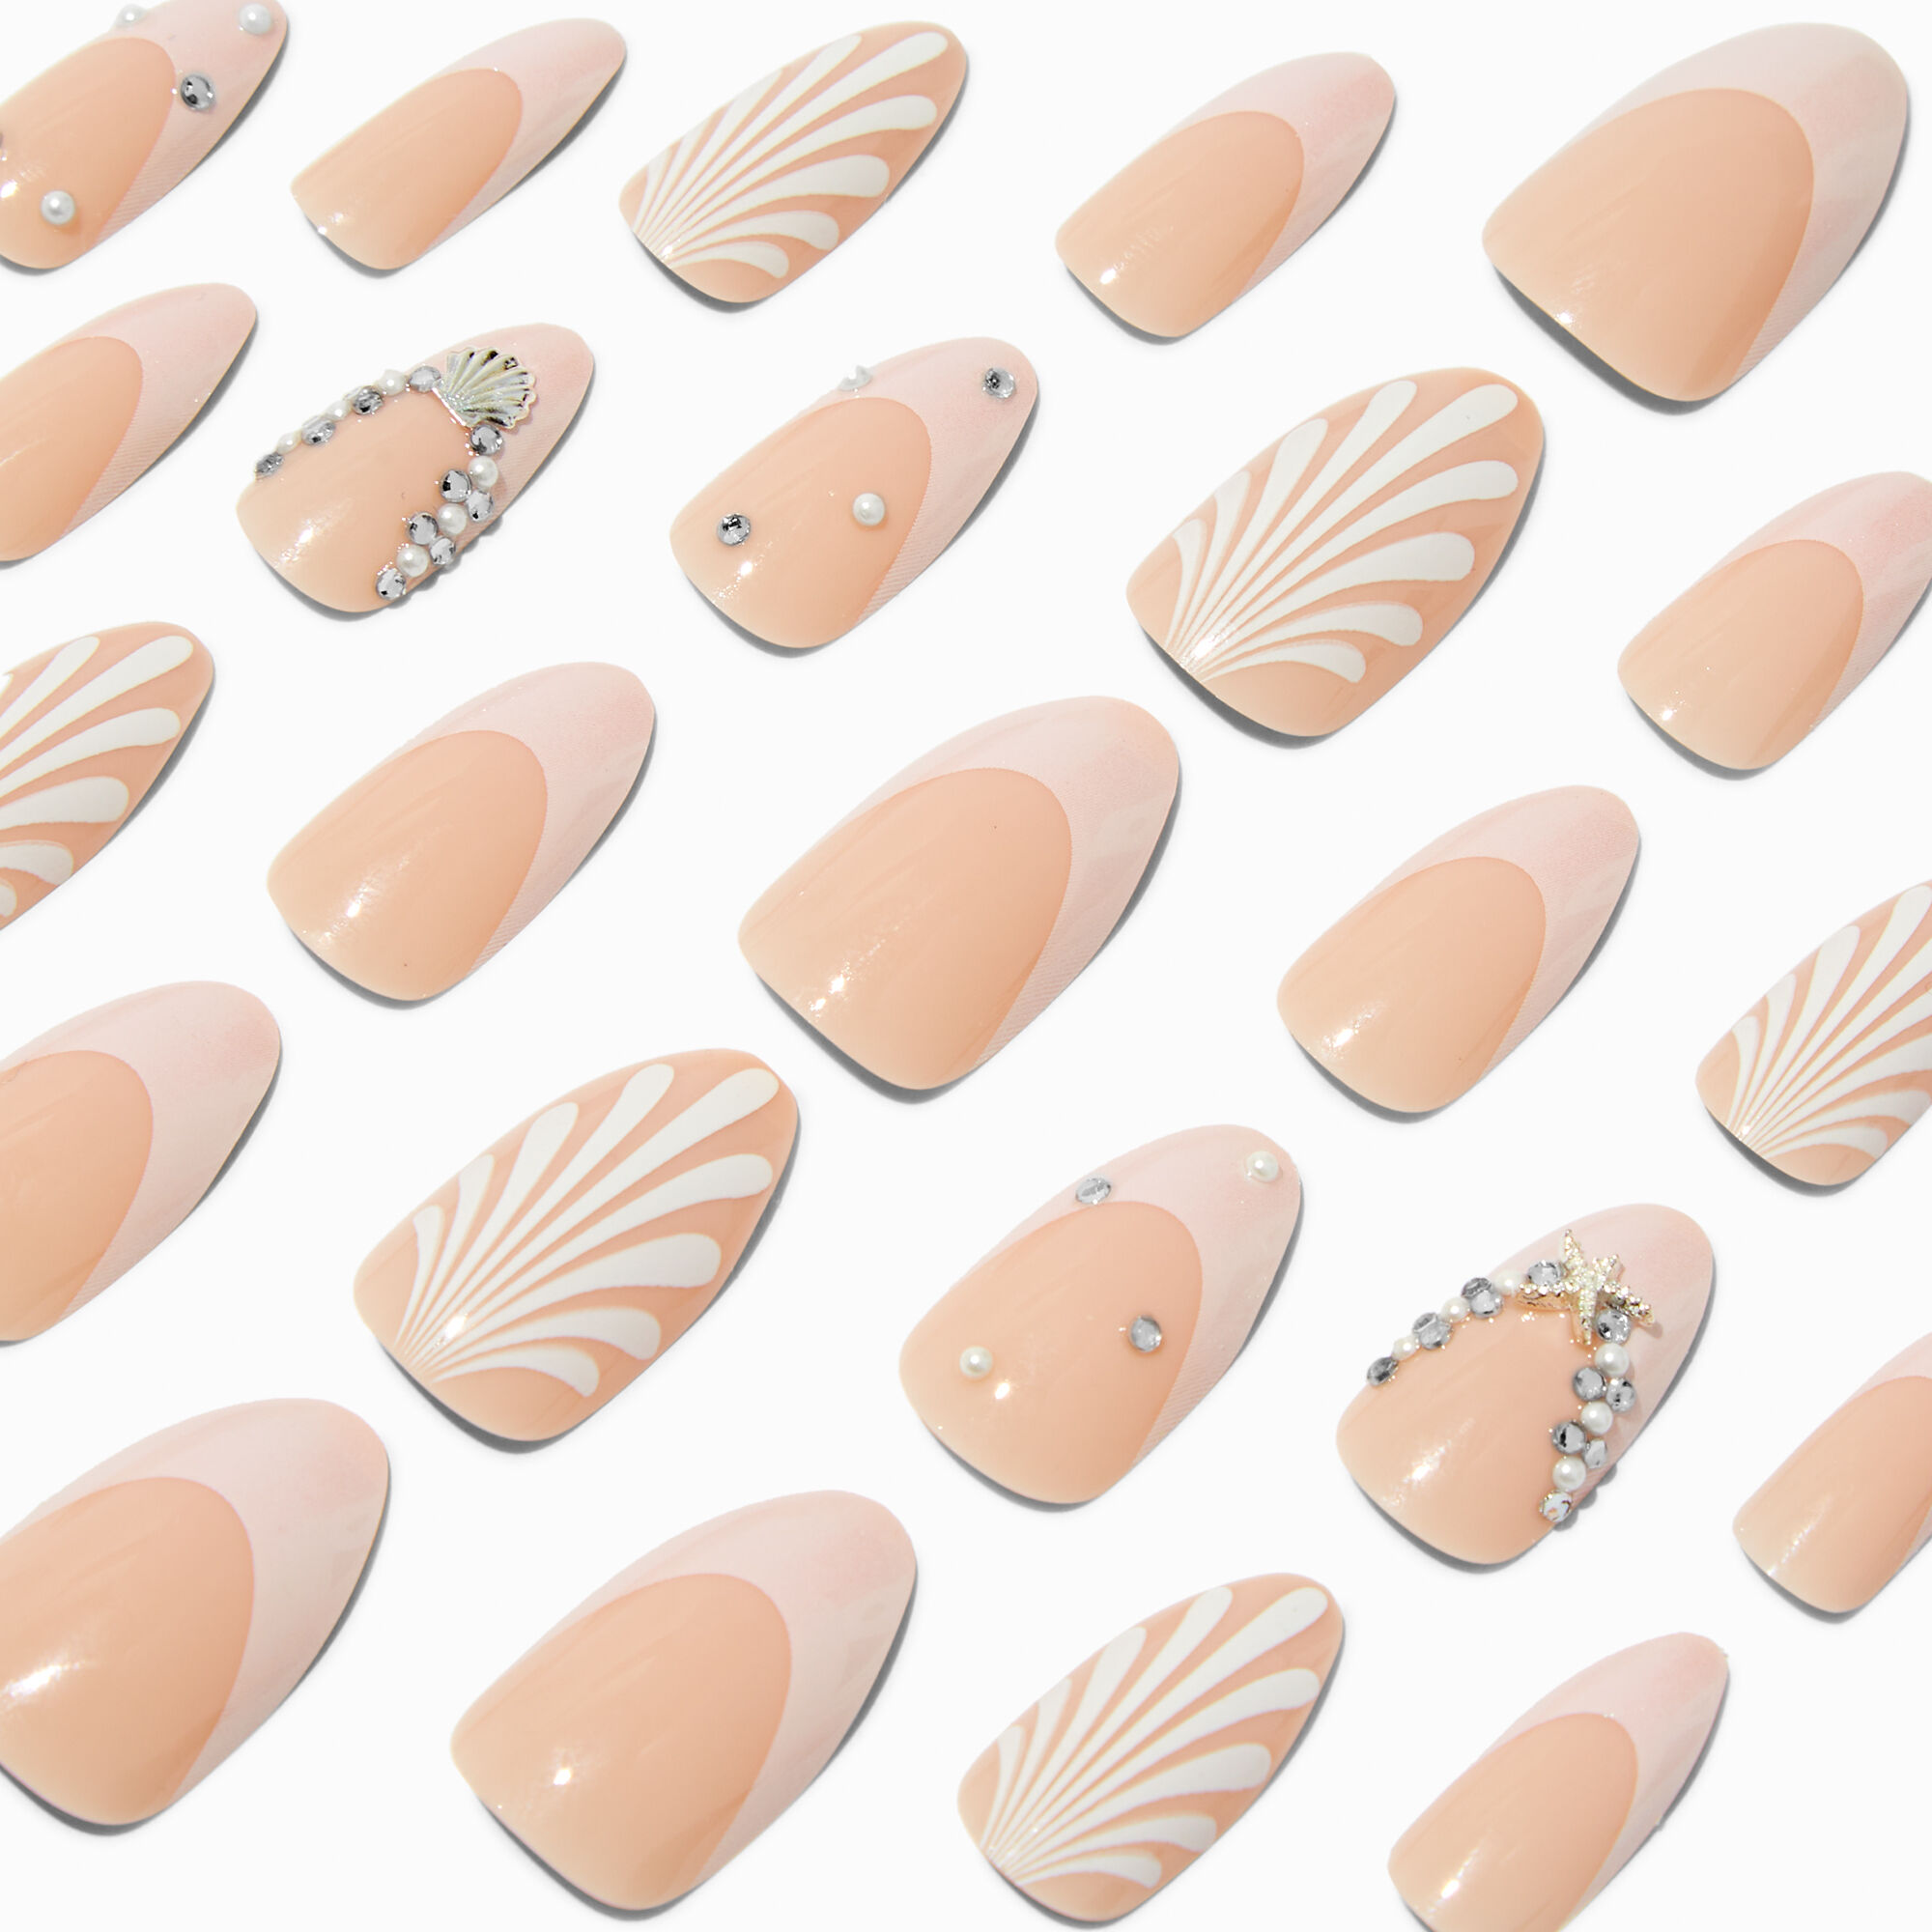 View Claires Bling Shells Pearls Almond Vegan Faux Nail Set 24 Pack information